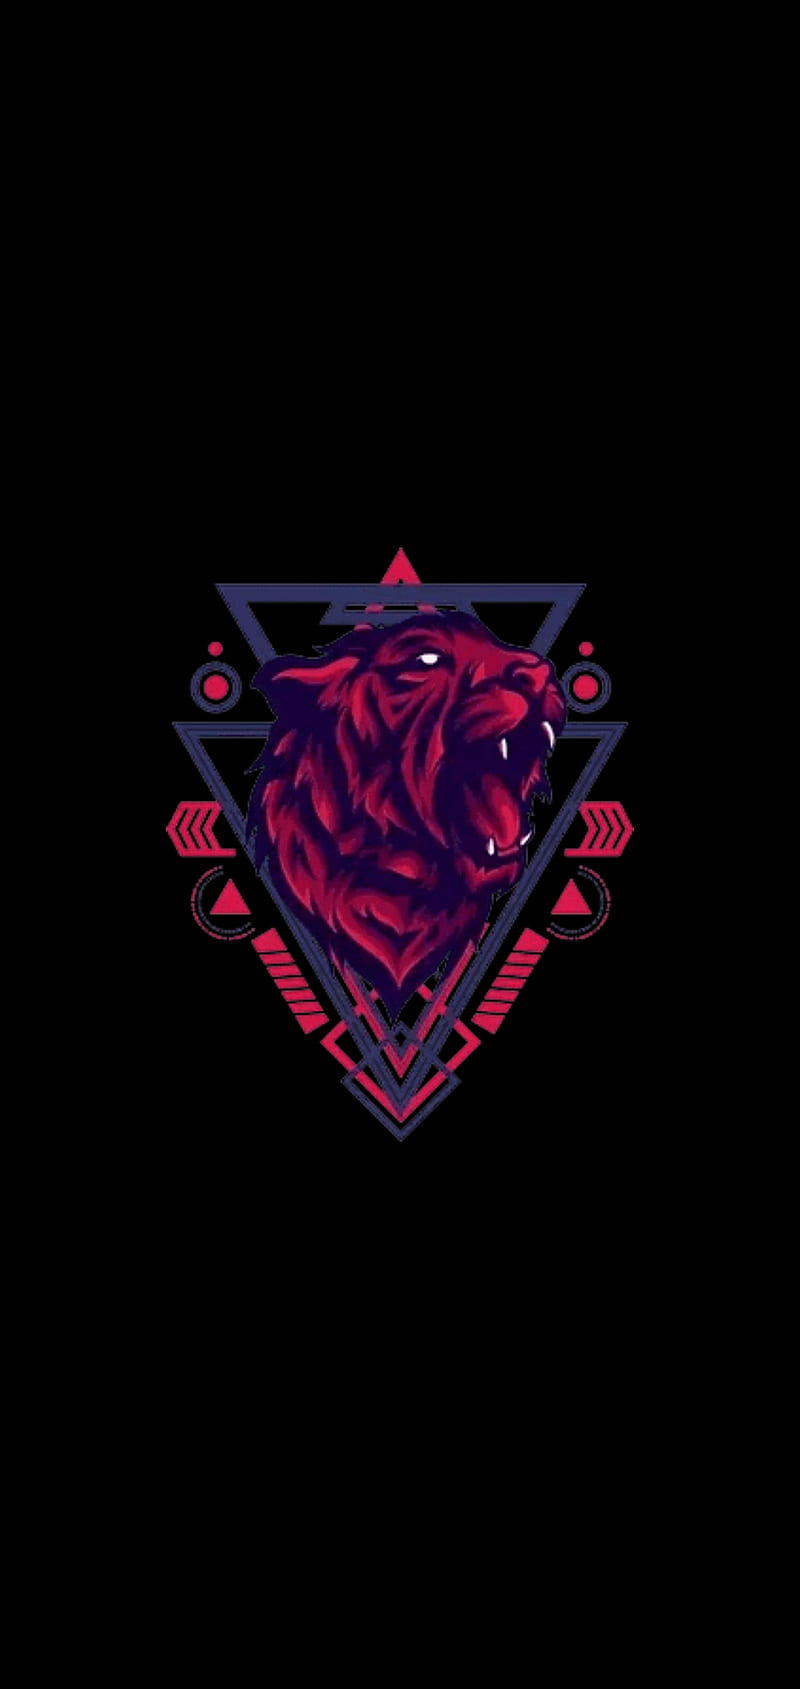 Tiger head mascot logo for gaming and sport - TemplateMonster